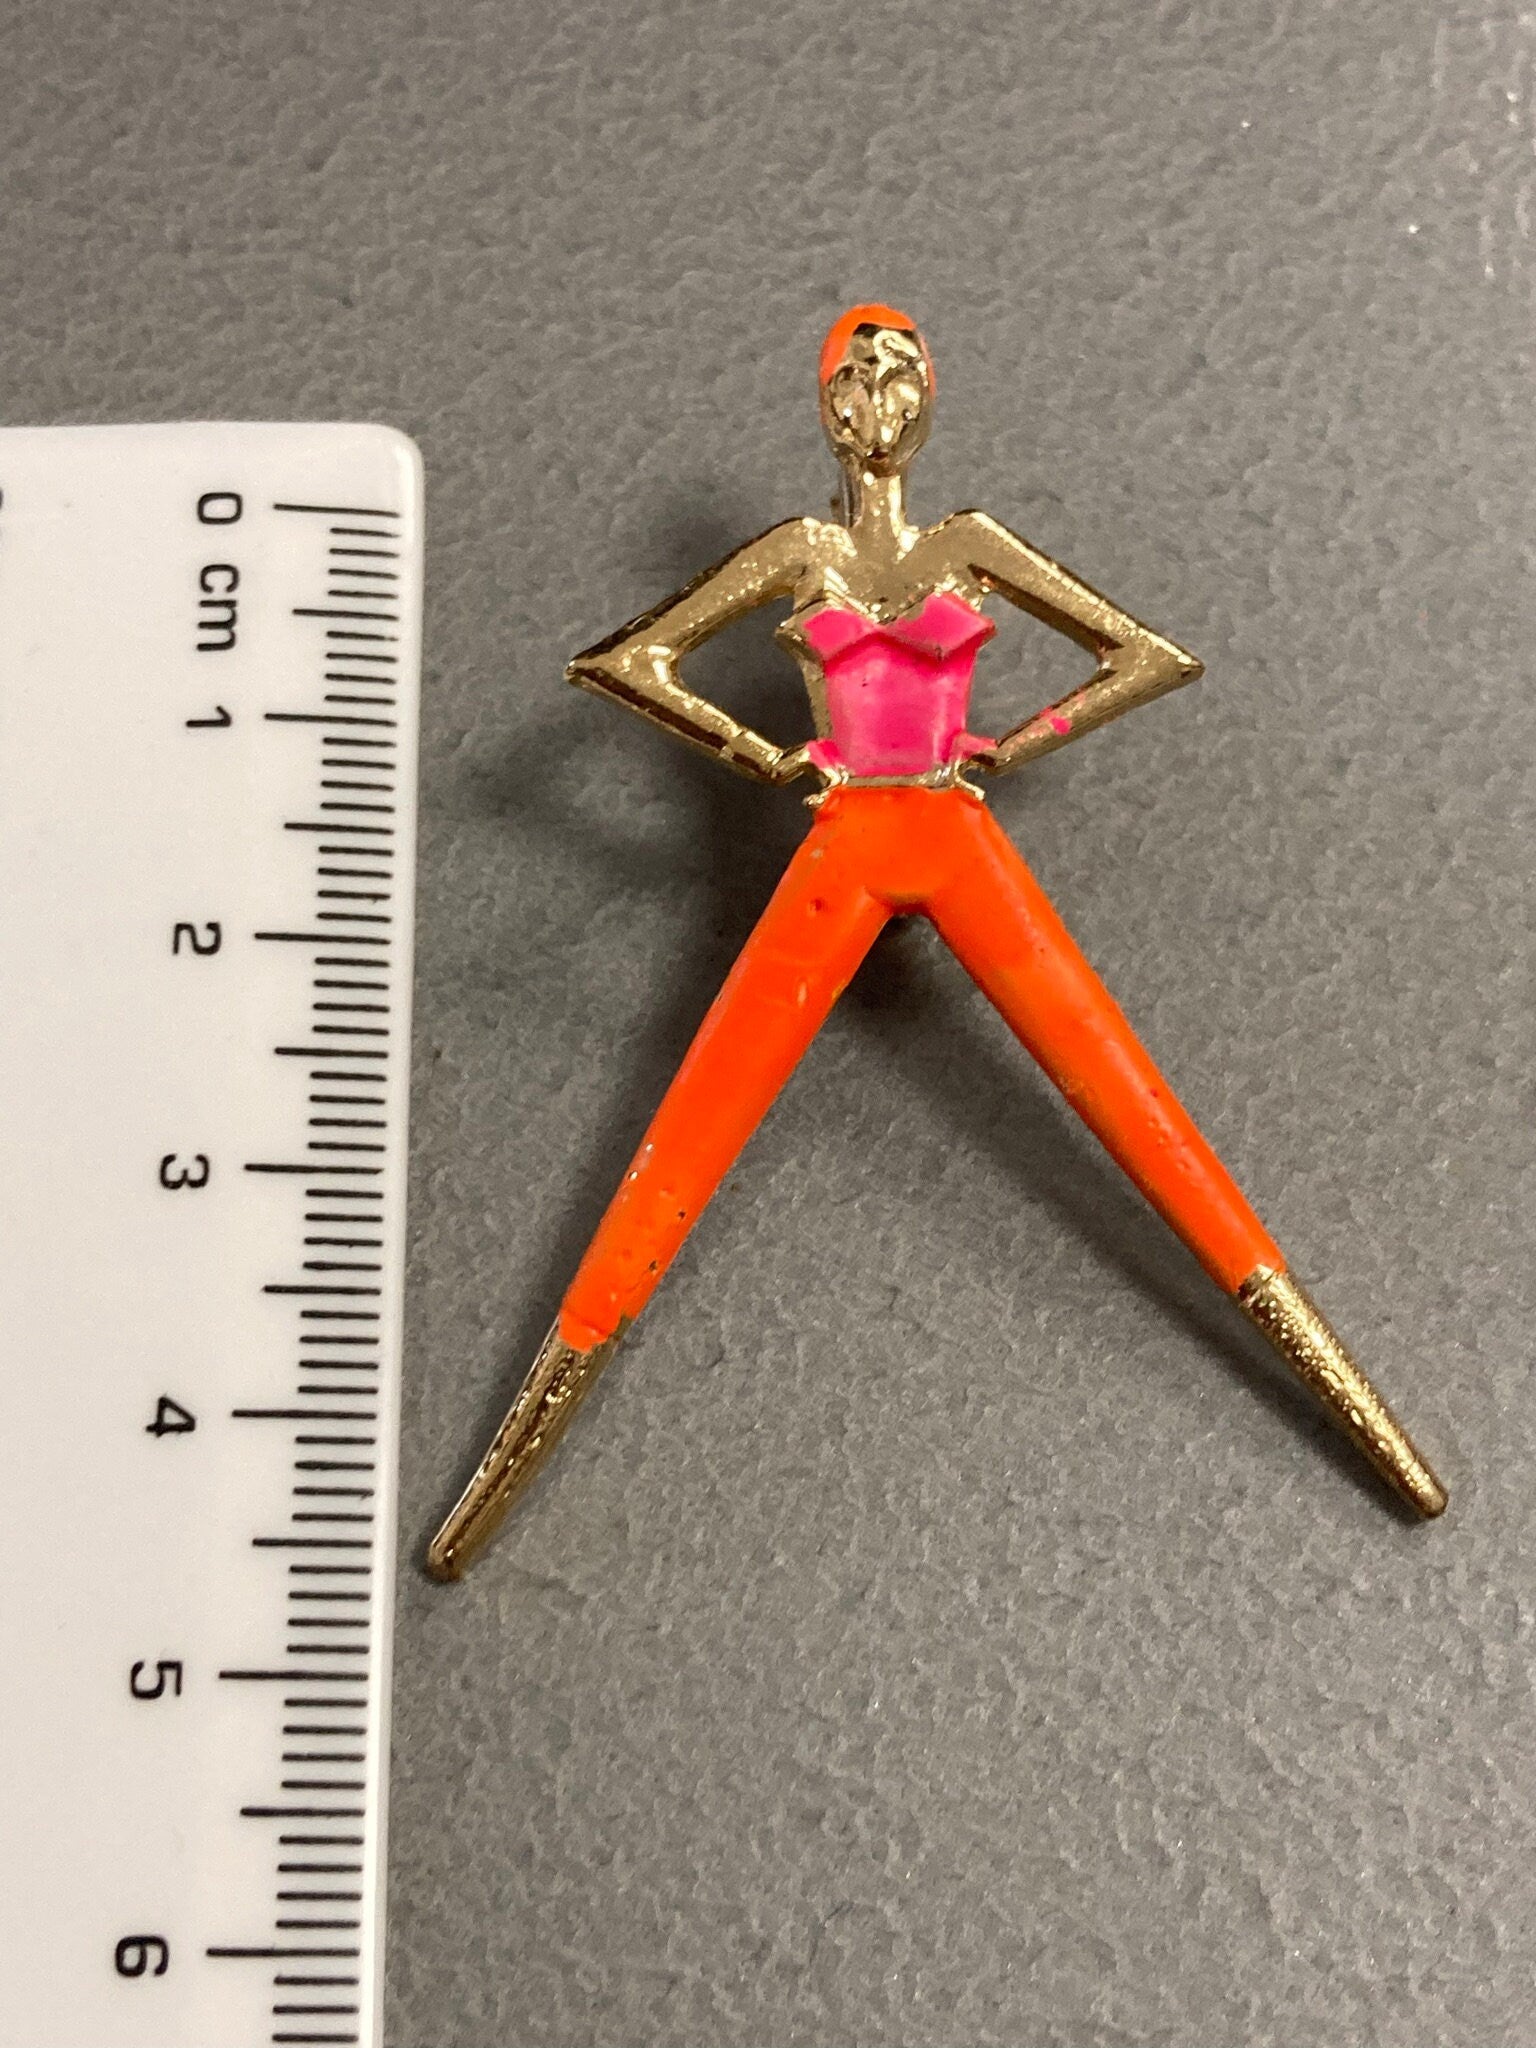 Kitsch 1980s Fitness Yoga luminous painted pink orange lady exercising brooch gold tone